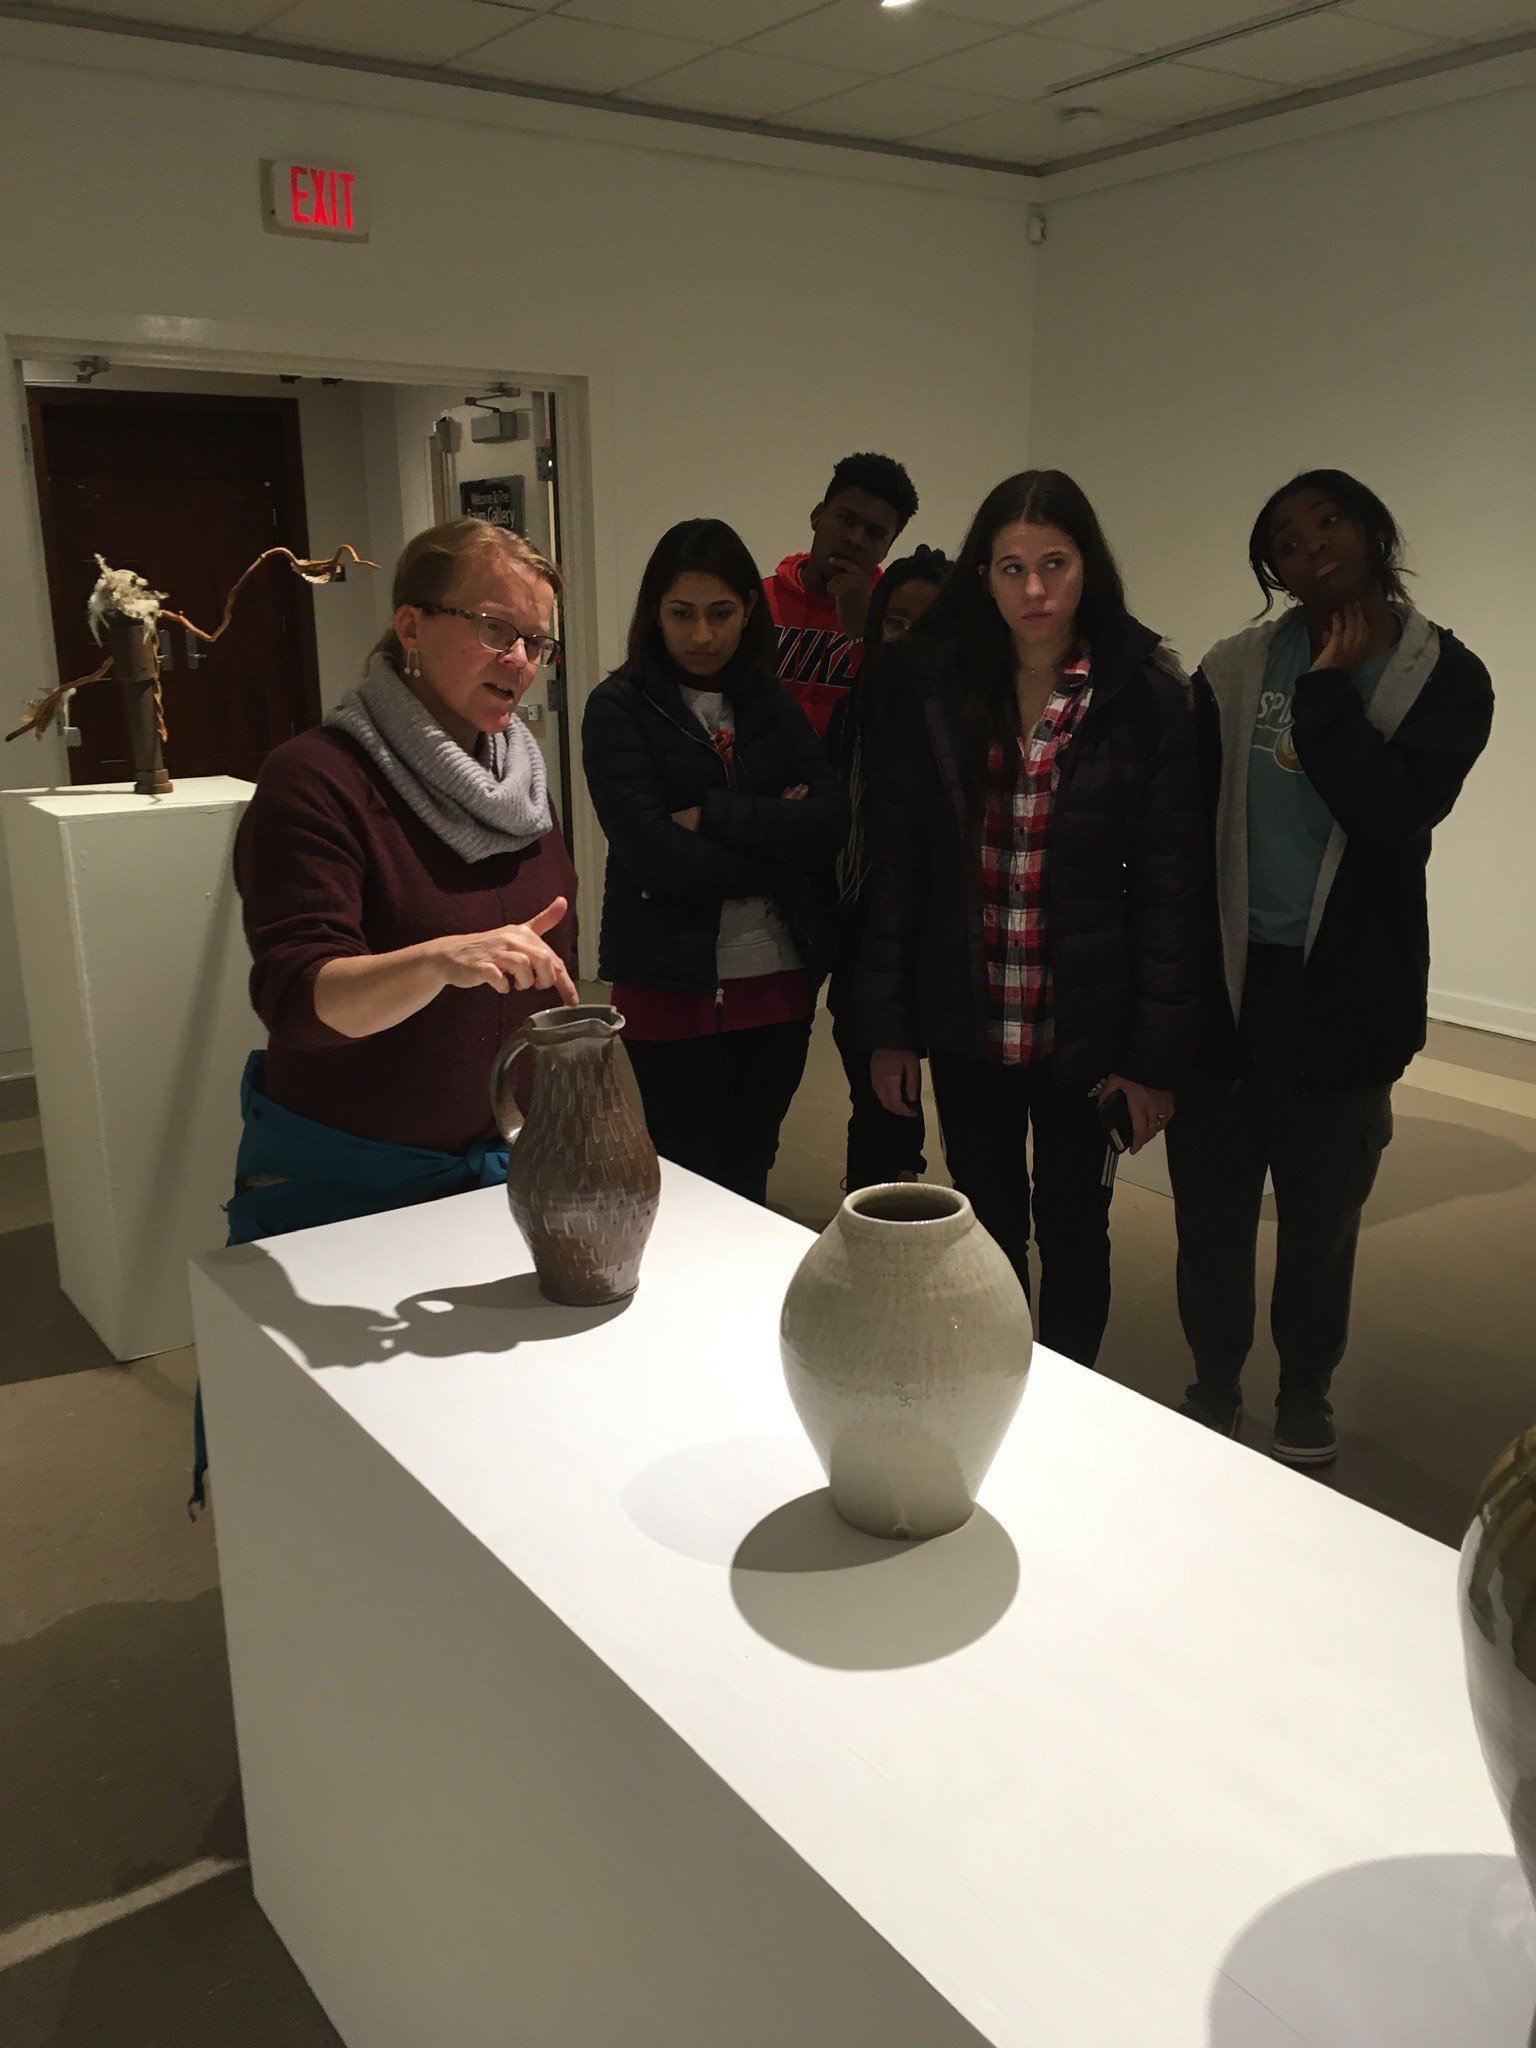  Professor Lis Smith with students at the show  Fired Up in the Natural State: Contemporary Ceramics , 2020 